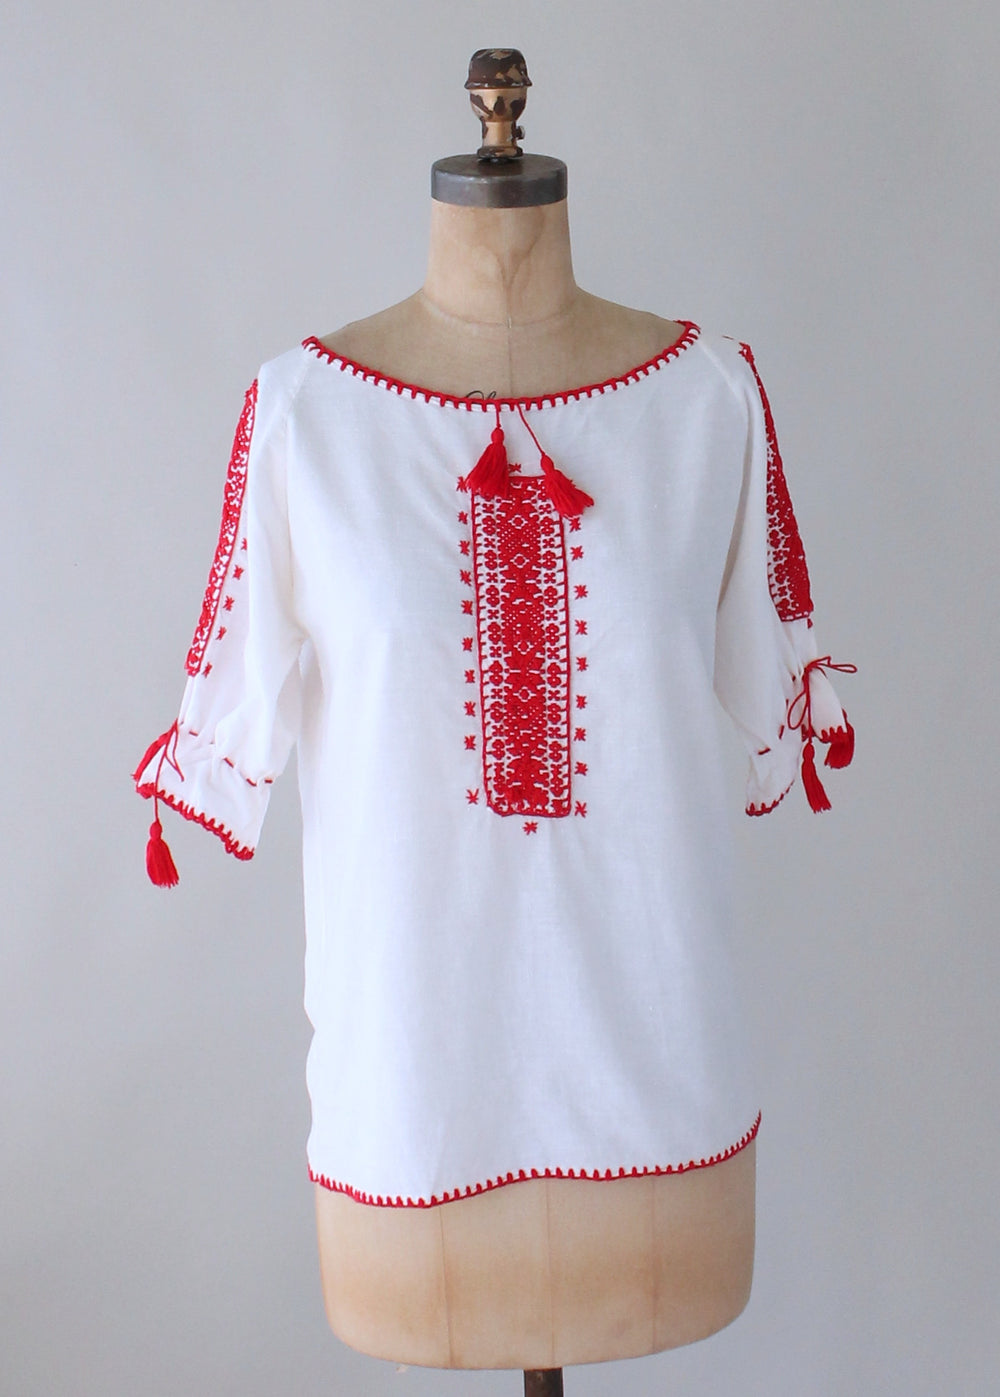 Vintage 1970s Red and White Embroidered Cotton Peasant Shirt - Raleigh ...